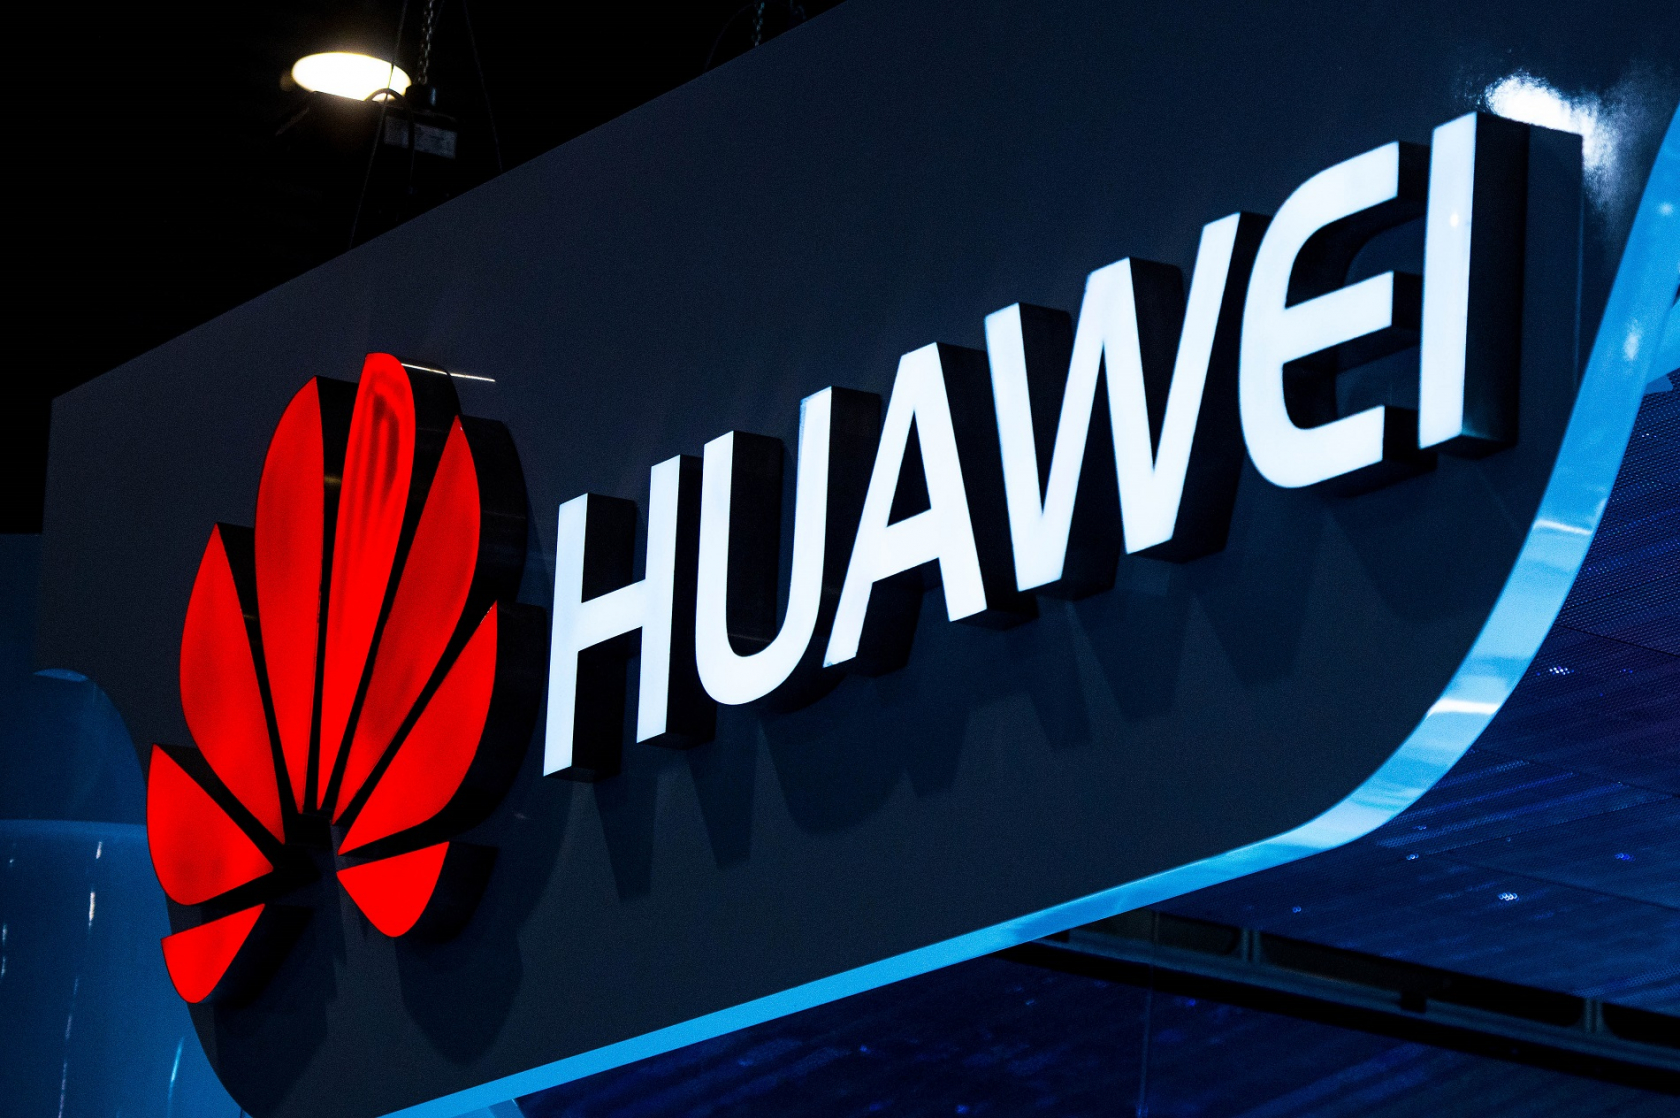 Huawei reportedly under investigation by US for stealing trade secrets